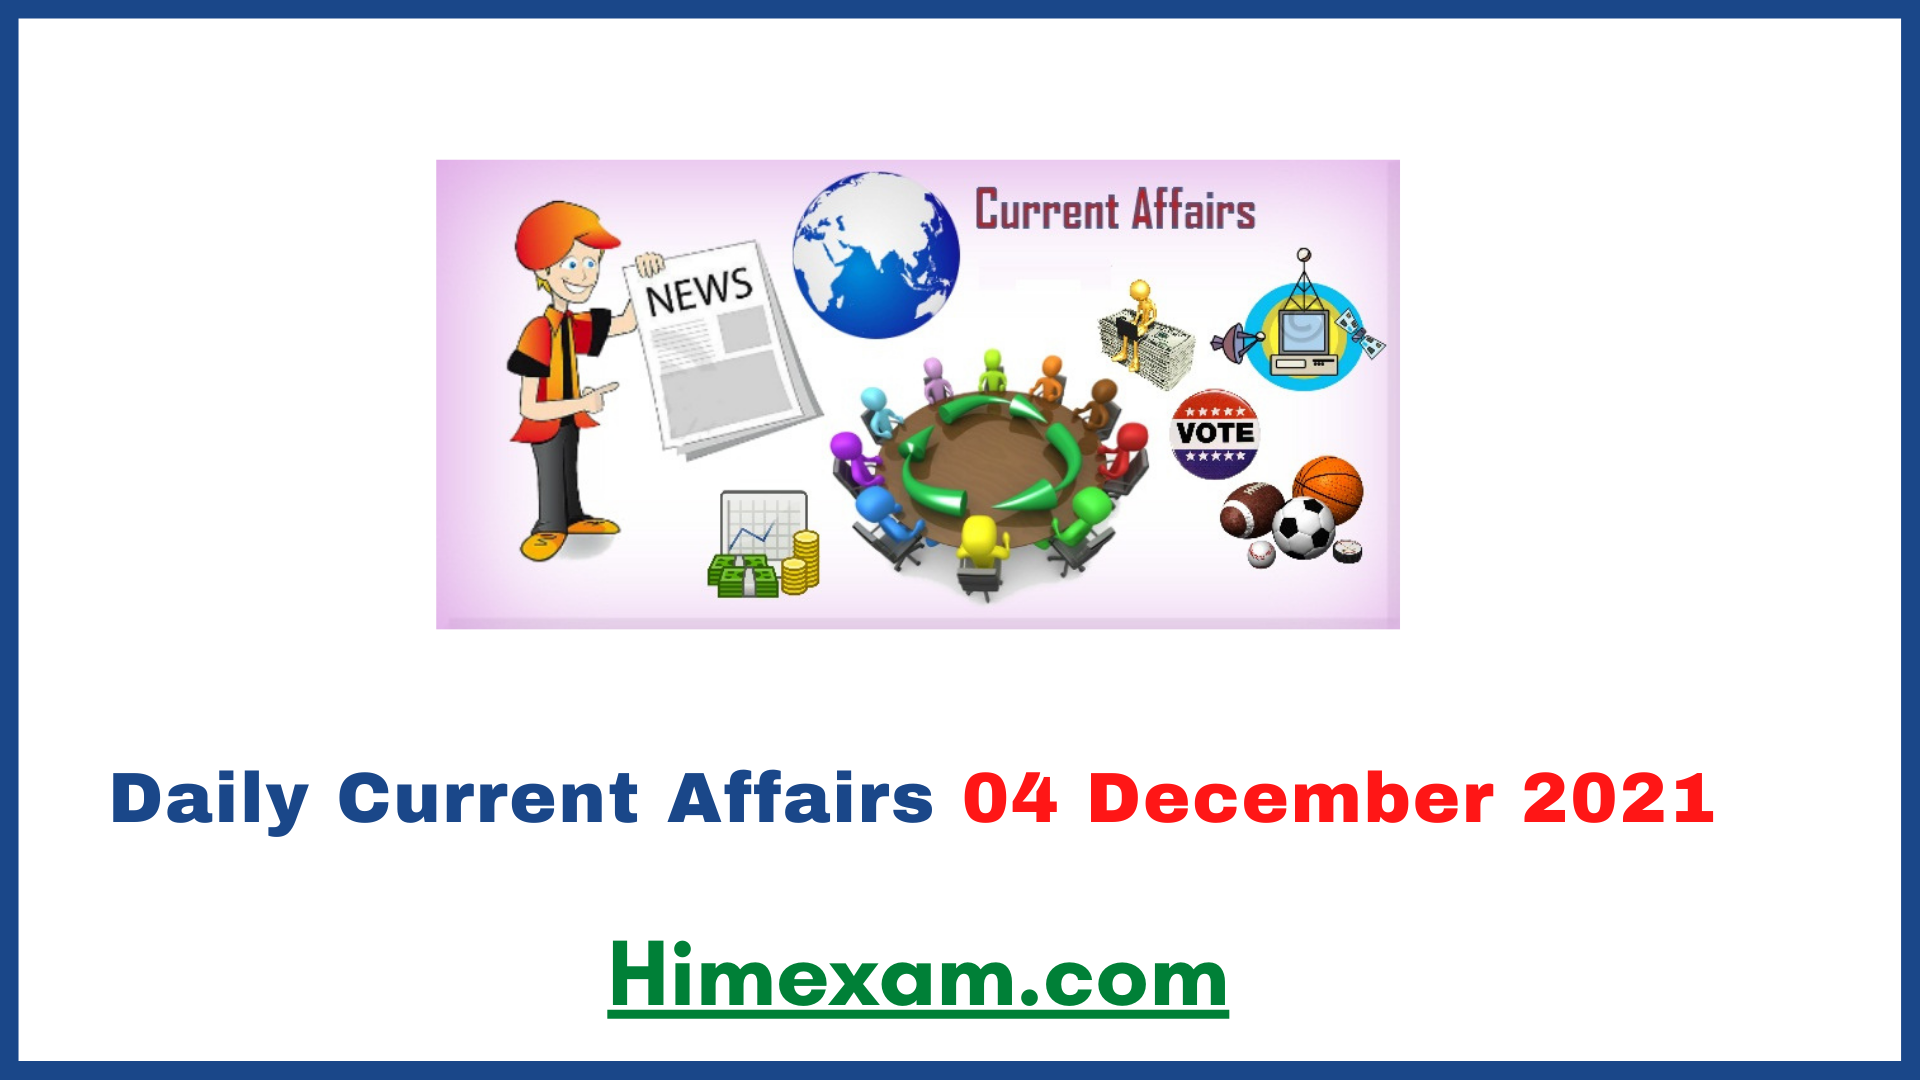 Daily Current Affairs 04 December 2021